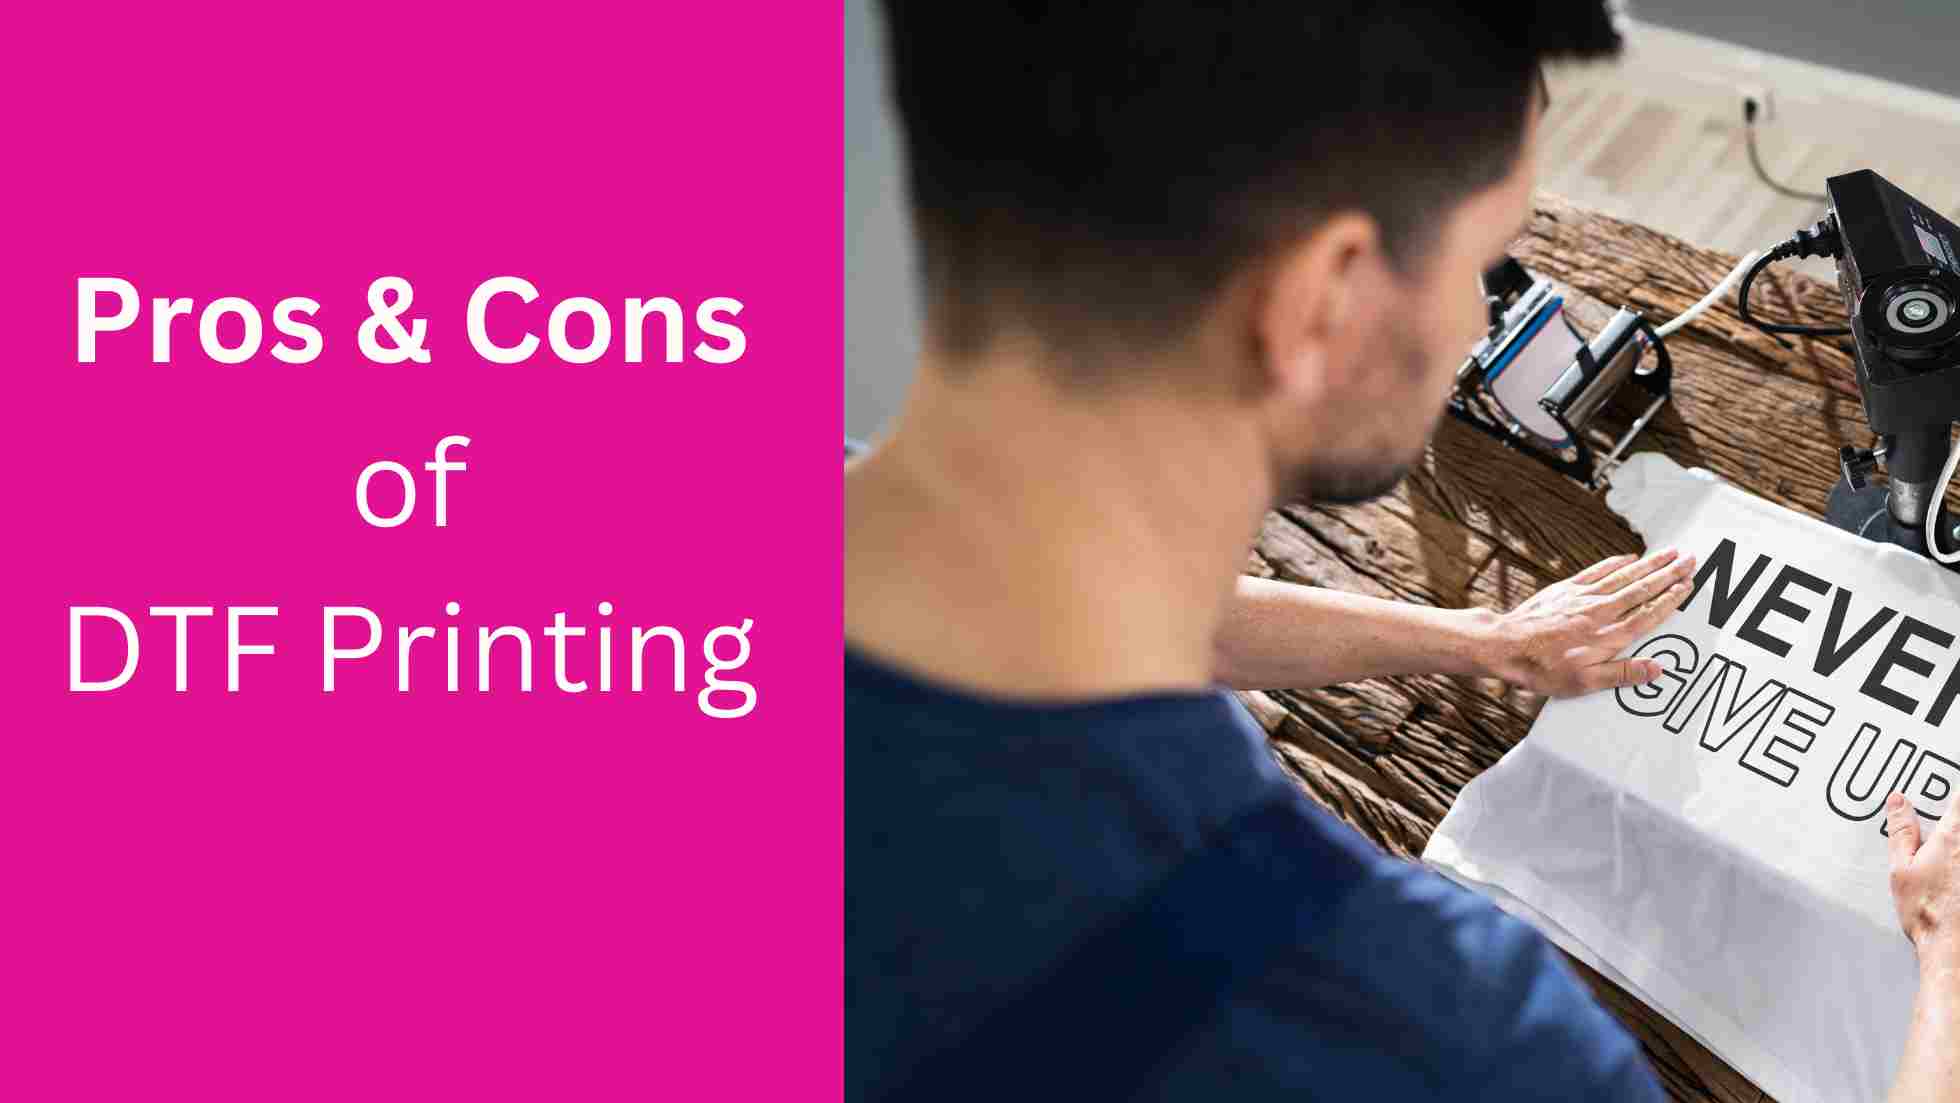 DTG vs. Screen Printing  Pros, Cons, How Much It Costs